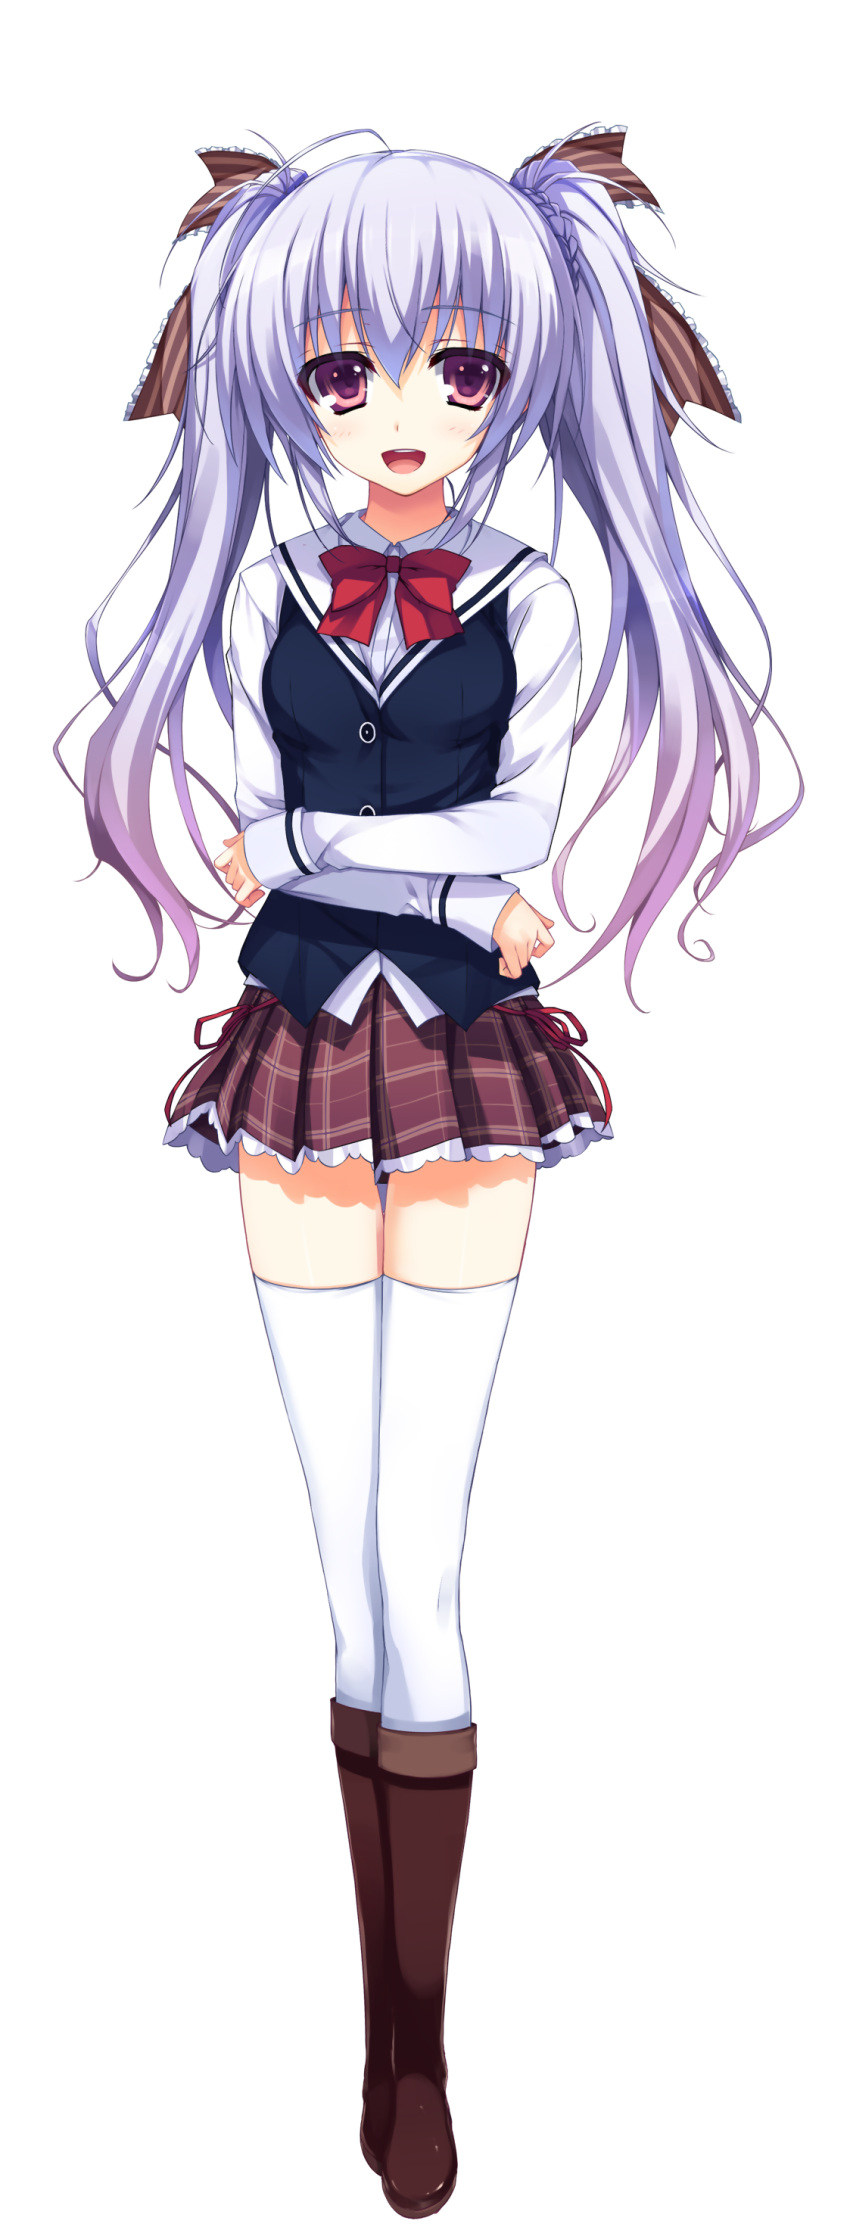 1girl absurdres blush boots crossed_arms full_body highres knee_boots lavender_hair long_hair long_sleeves looking_at_viewer open_mouth pleated_skirt reminiscence ribbon school_uniform shimazu_aki simple_background skirt smile thigh-highs tomose_shunsaku transparent_background twintails violet_eyes white_legwear zettai_ryouiki